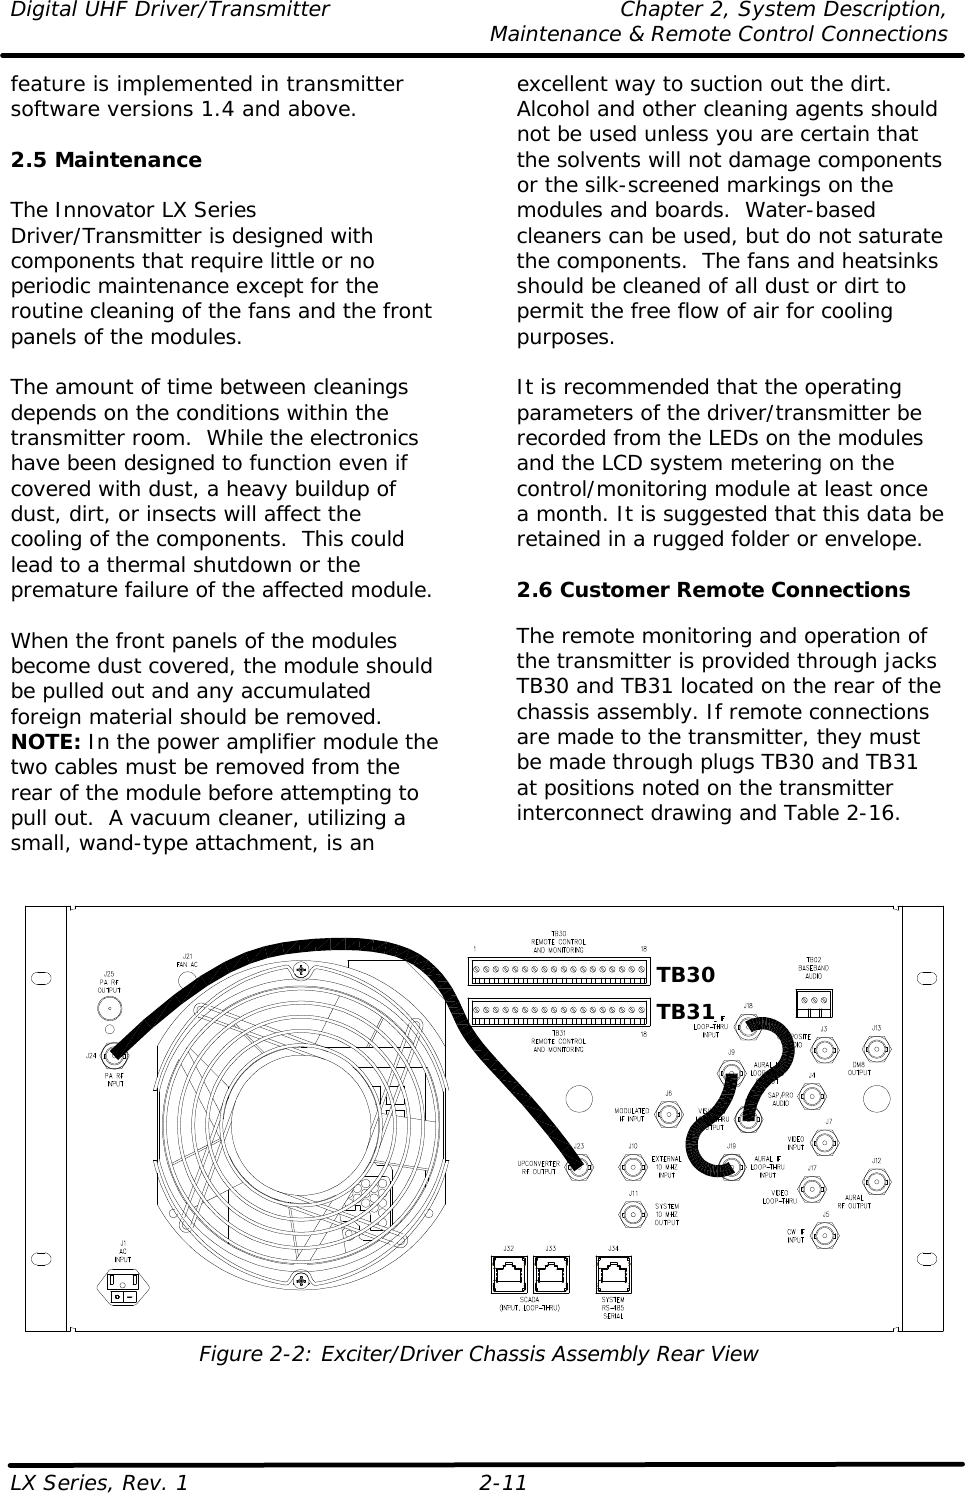 Digital UHF Driver/Transmitter Chapter 2, System Description,  Maintenance &amp; Remote Control Connections LX Series, Rev. 1 2-11 feature is implemented in transmitter software versions 1.4 and above.  2.5 Maintenance  The Innovator LX Series Driver/Transmitter is designed with components that require little or no periodic maintenance except for the routine cleaning of the fans and the front panels of the modules.  The amount of time between cleanings depends on the conditions within the transmitter room.  While the electronics have been designed to function even if covered with dust, a heavy buildup of dust, dirt, or insects will affect the cooling of the components.  This could lead to a thermal shutdown or the premature failure of the affected module.  When the front panels of the modules become dust covered, the module should be pulled out and any accumulated foreign material should be removed.  NOTE: In the power amplifier module the two cables must be removed from the rear of the module before attempting to pull out.  A vacuum cleaner, utilizing a small, wand-type attachment, is an excellent way to suction out the dirt.  Alcohol and other cleaning agents should not be used unless you are certain that the solvents will not damage components or the silk-screened markings on the modules and boards.  Water-based cleaners can be used, but do not saturate the components.  The fans and heatsinks should be cleaned of all dust or dirt to permit the free flow of air for cooling purposes.  It is recommended that the operating parameters of the driver/transmitter be recorded from the LEDs on the modules and the LCD system metering on the control/monitoring module at least once a month. It is suggested that this data be retained in a rugged folder or envelope.   2.6 Customer Remote Connections  The remote monitoring and operation of the transmitter is provided through jacks TB30 and TB31 located on the rear of the chassis assembly. If remote connections are made to the transmitter, they must be made through plugs TB30 and TB31 at positions noted on the transmitter interconnect drawing and Table 2-16.     Figure 2-2: Exciter/Driver Chassis Assembly Rear View TB30 TB31 